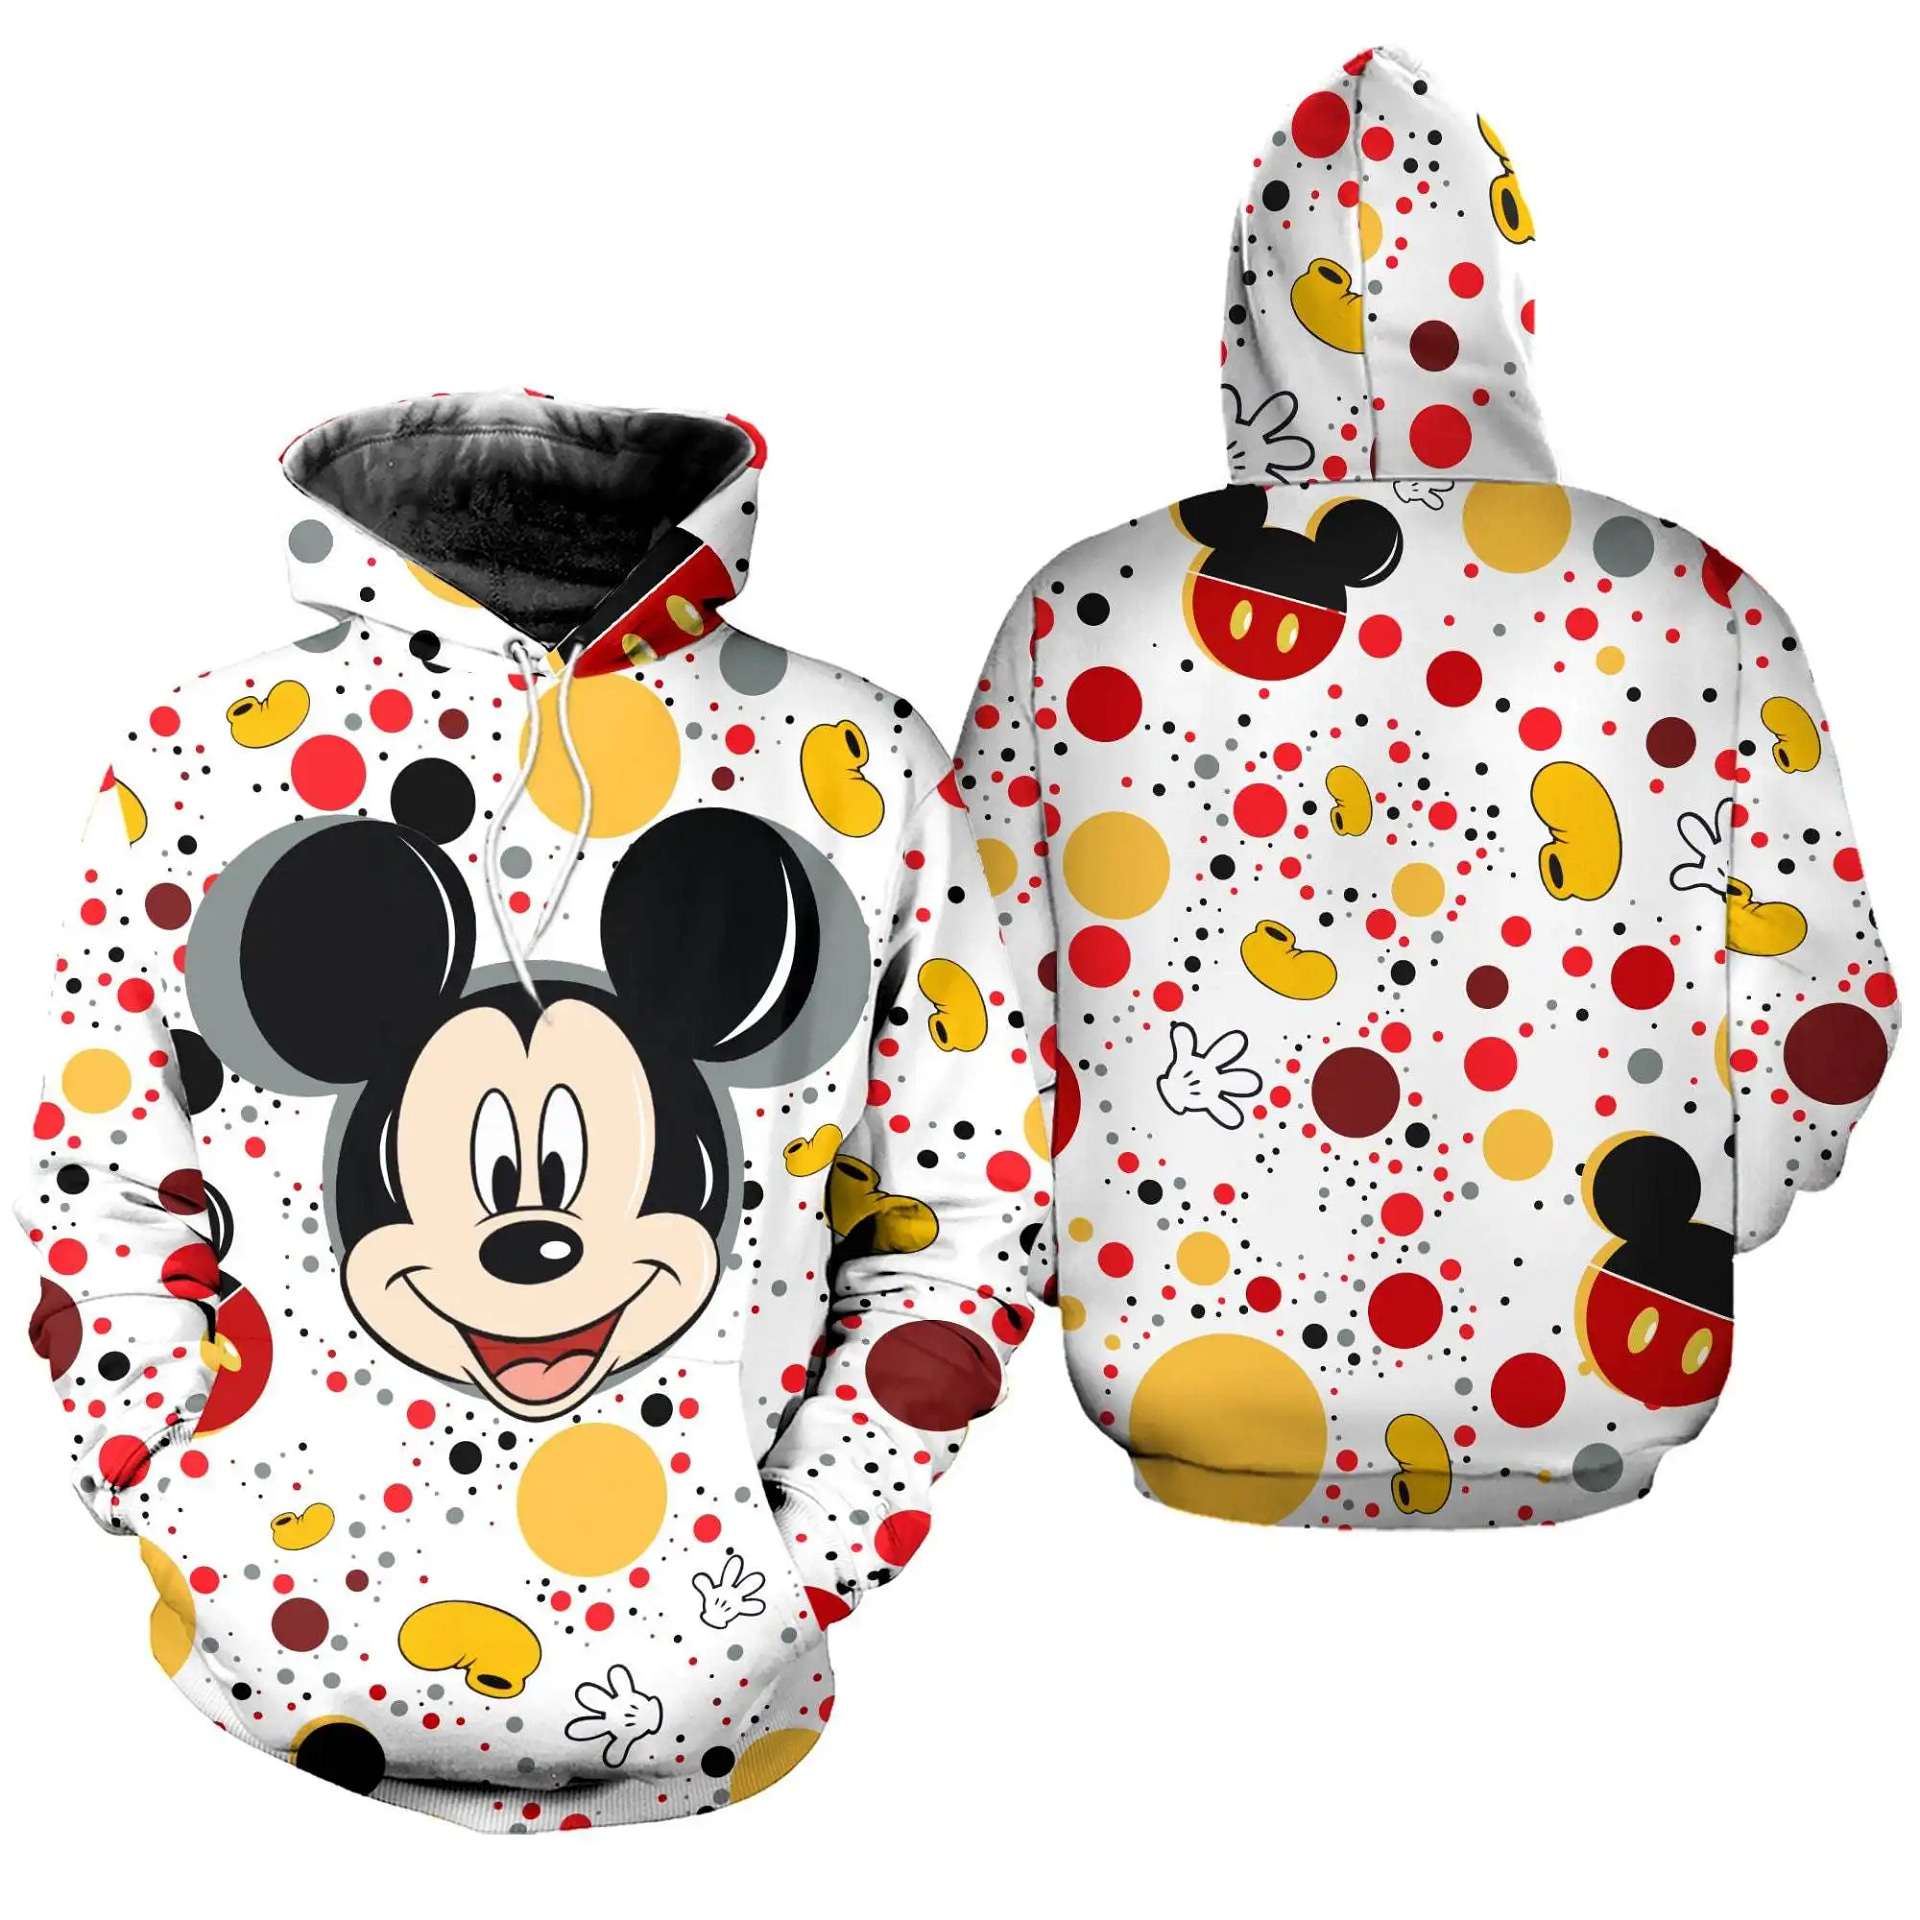 Mickey Mouse Polkadot Pattern Disney Cartoon Graphic Outfits Clothing Men Women Kids Toddlers Hoodie 3D